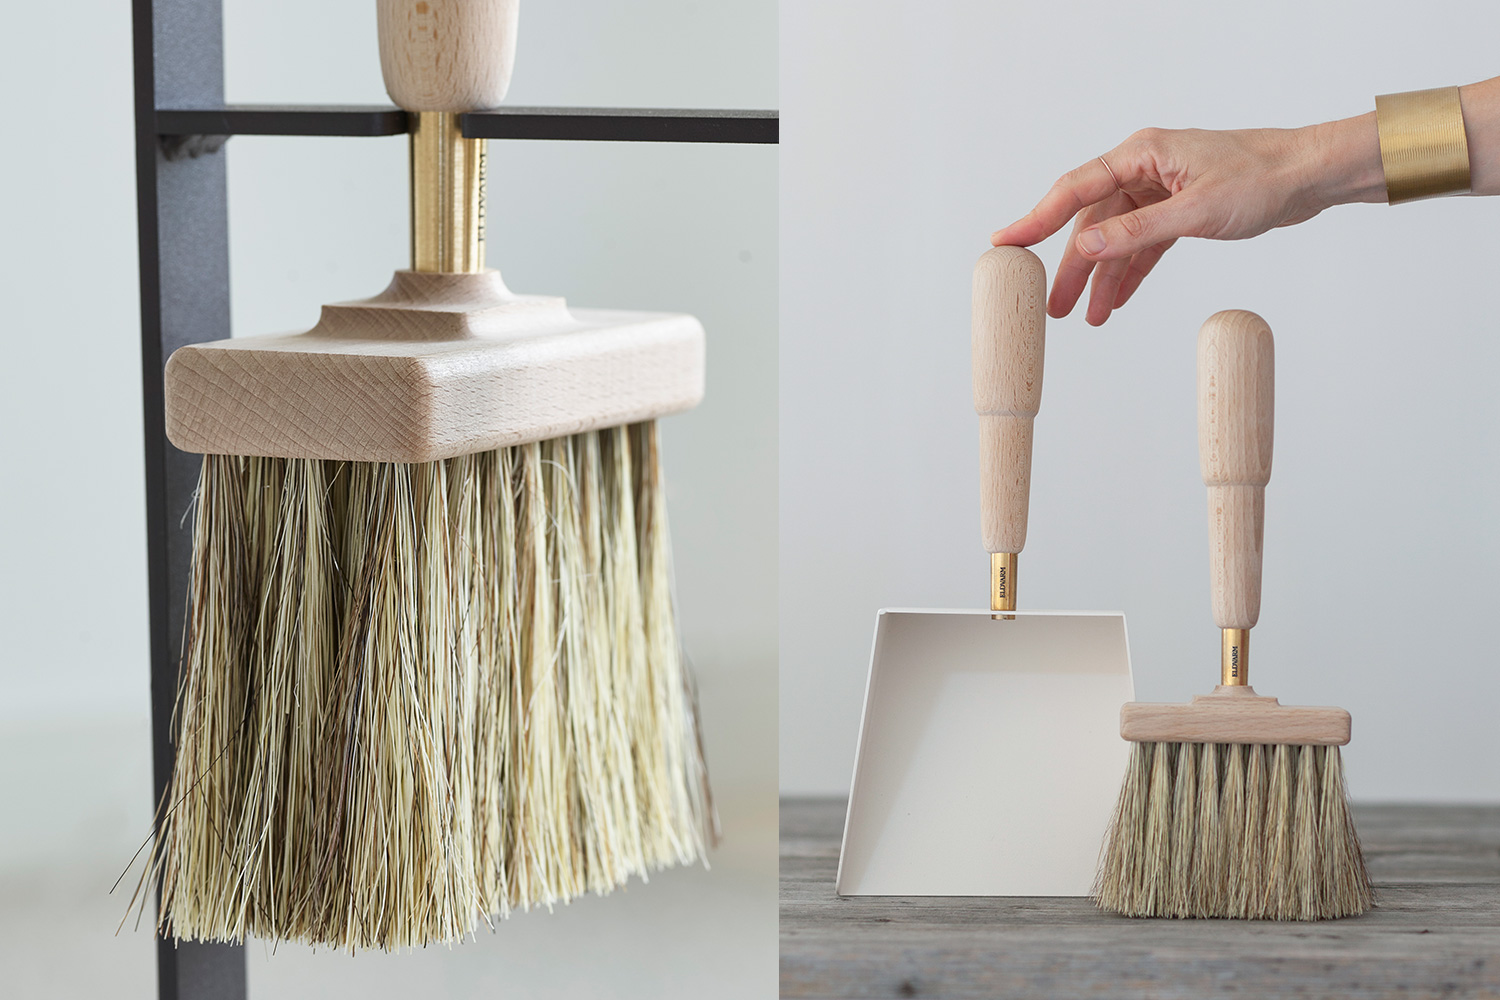 On the left is a close up of the Emma Brush head, the bristles are a special combination of horse hair and tampico, the root of the agave cactus. On the right is Emma Shovel and Brush in Blanc.